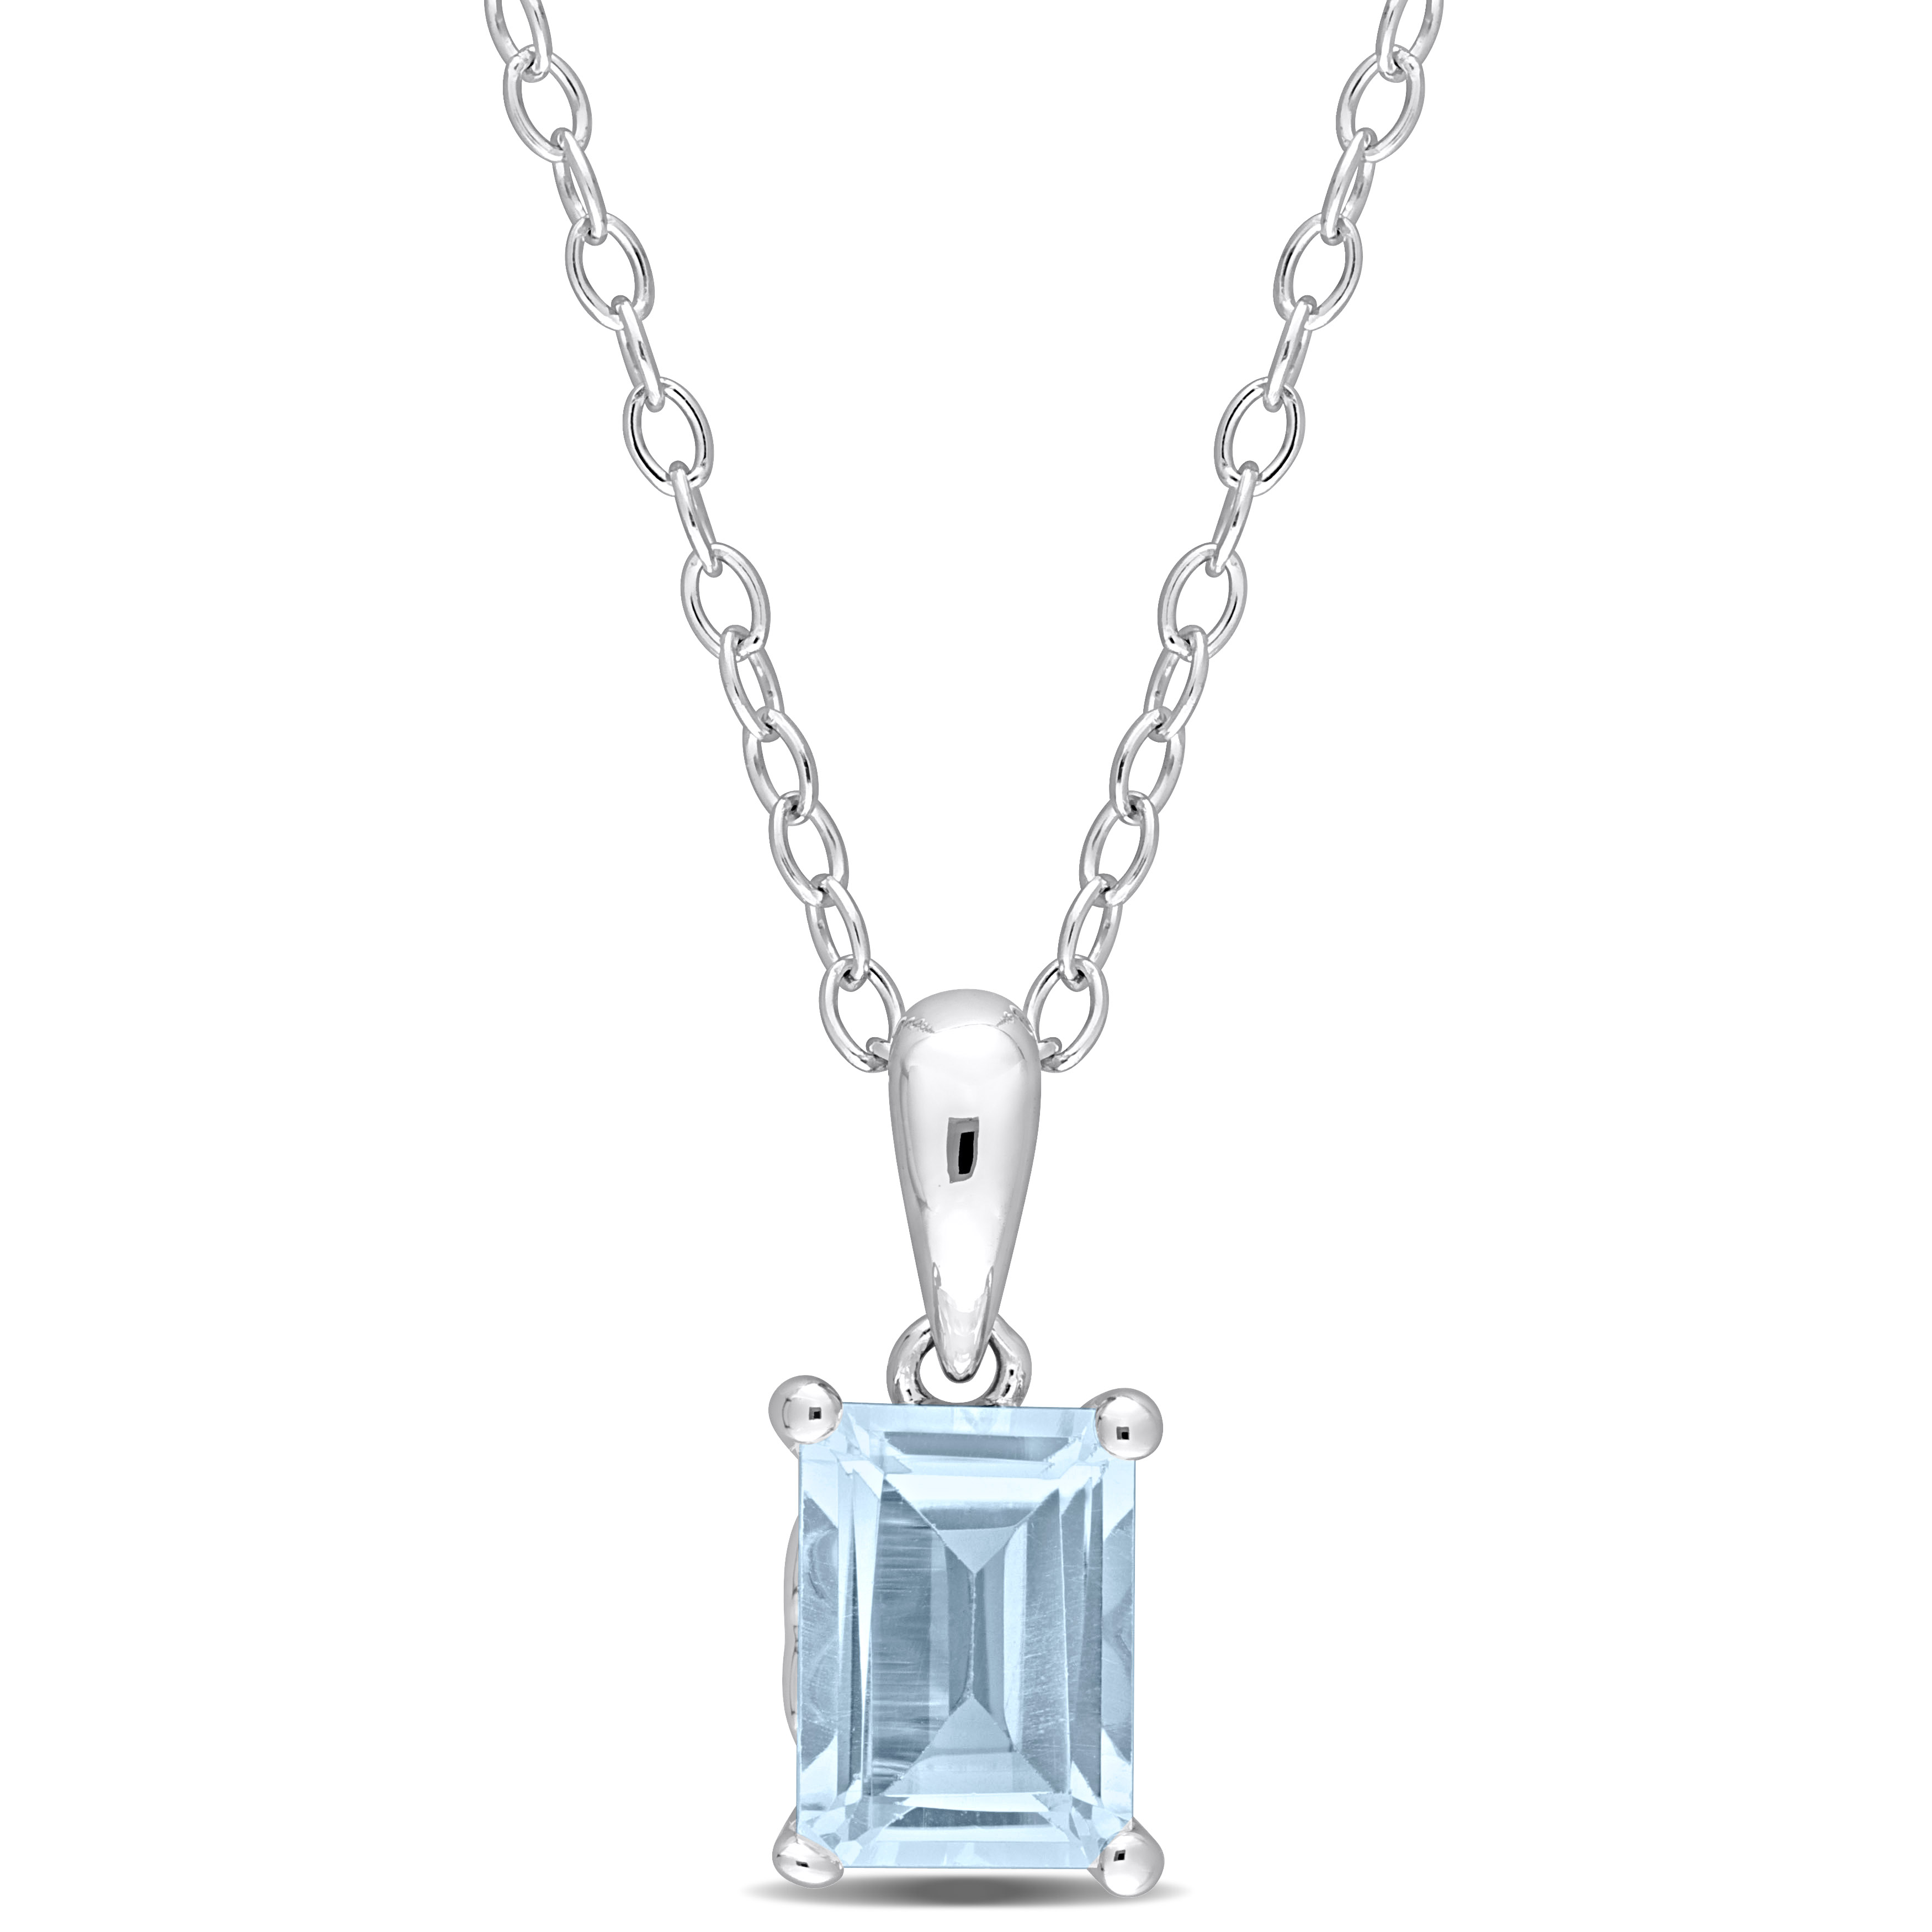 1 1/5 CT TGW Emerald Cut Sky Blue Topaz Solitaire Heart Design Pendant with Chain in Sterling Silver - 18 in.